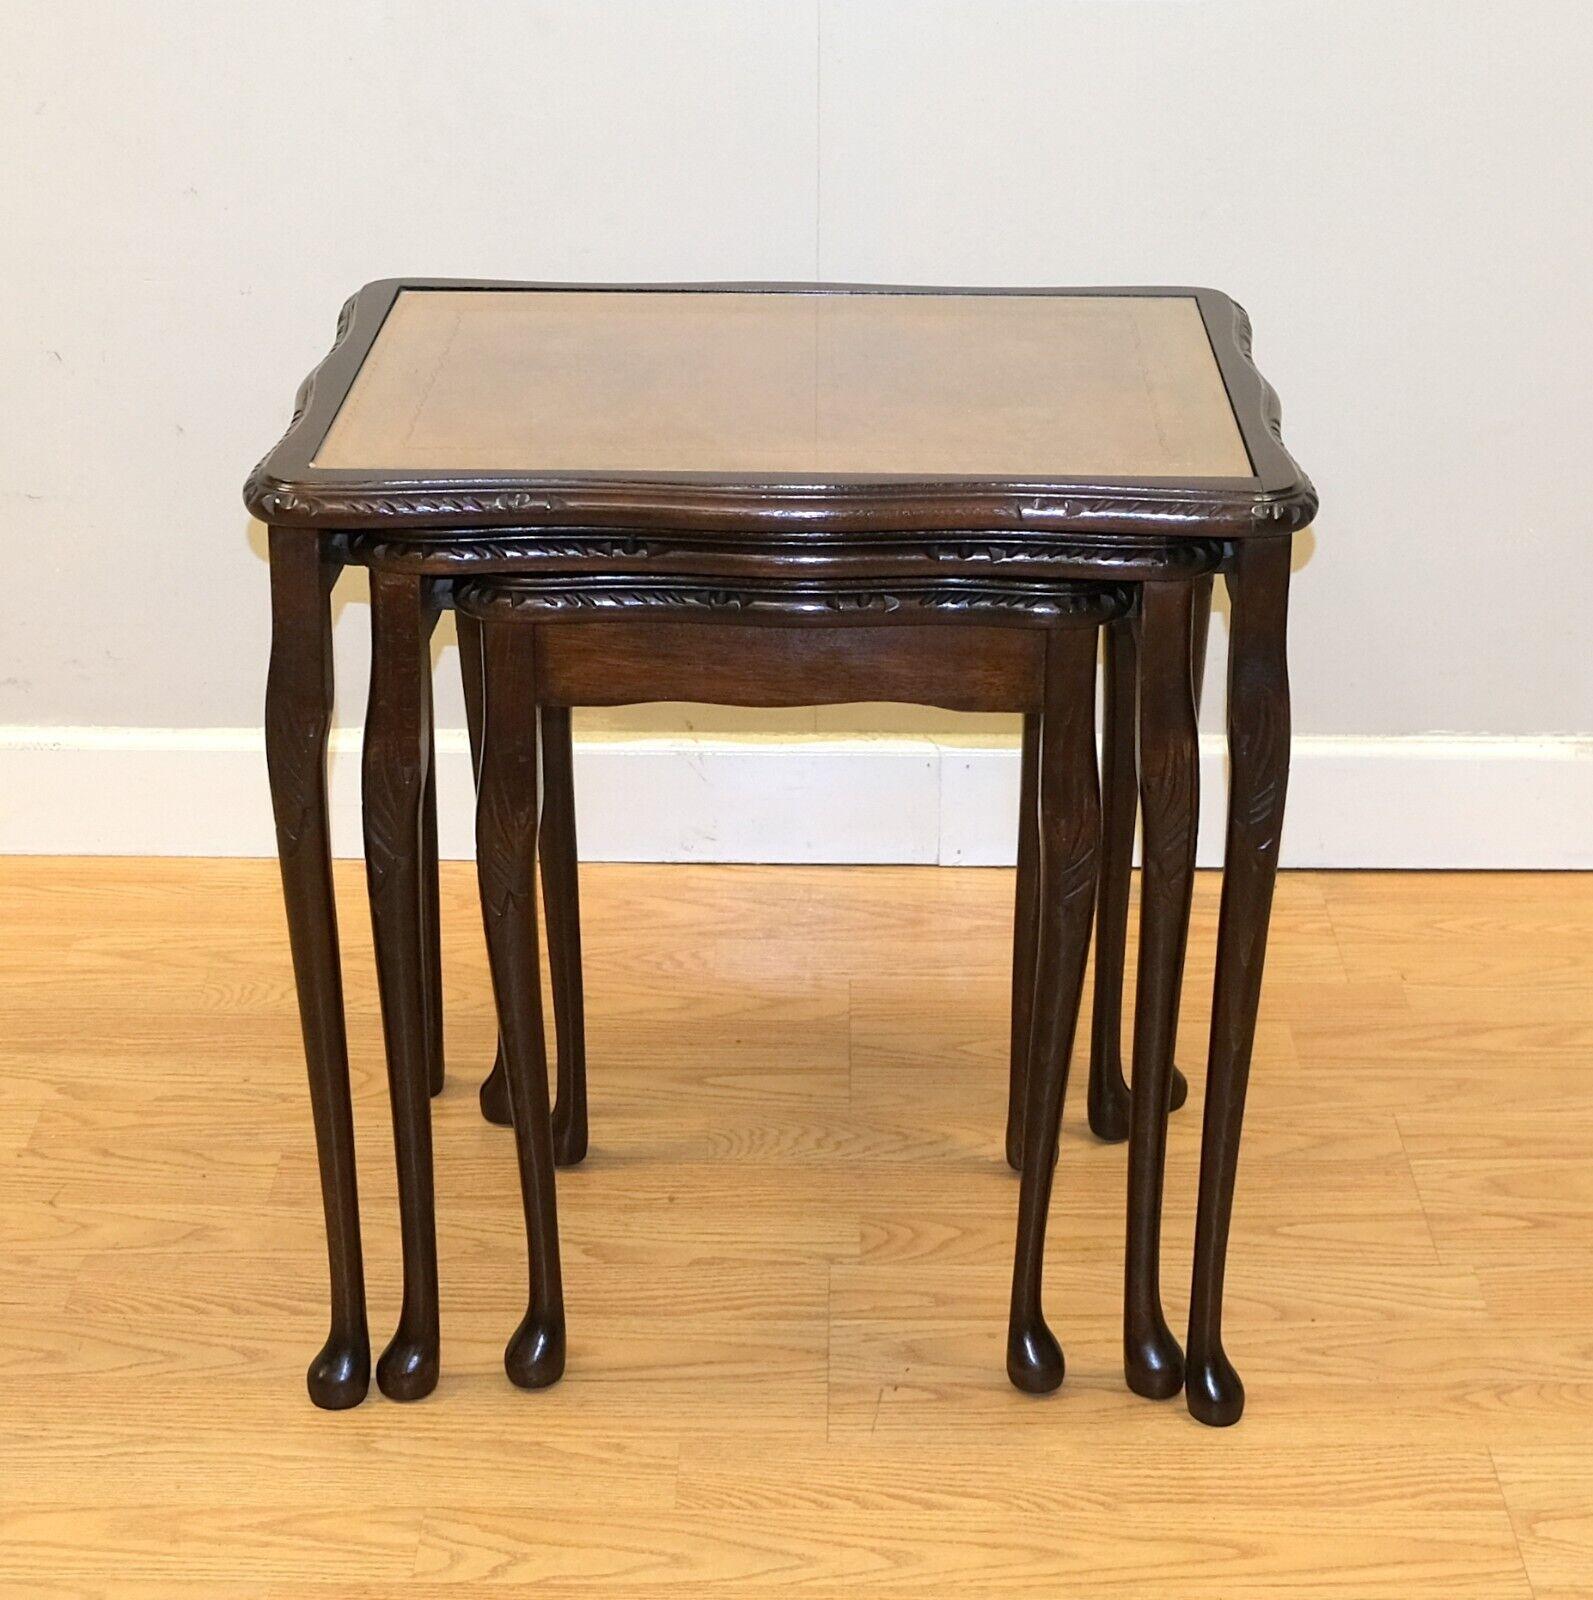 We are delighted to offer for sale this stunning Bevan Funnell Mahogany nest of tables with leather and glass top.

A well made and rich mahogany nest of tables from the well known British furniture maker, Bevan Funnell. The set is presented with